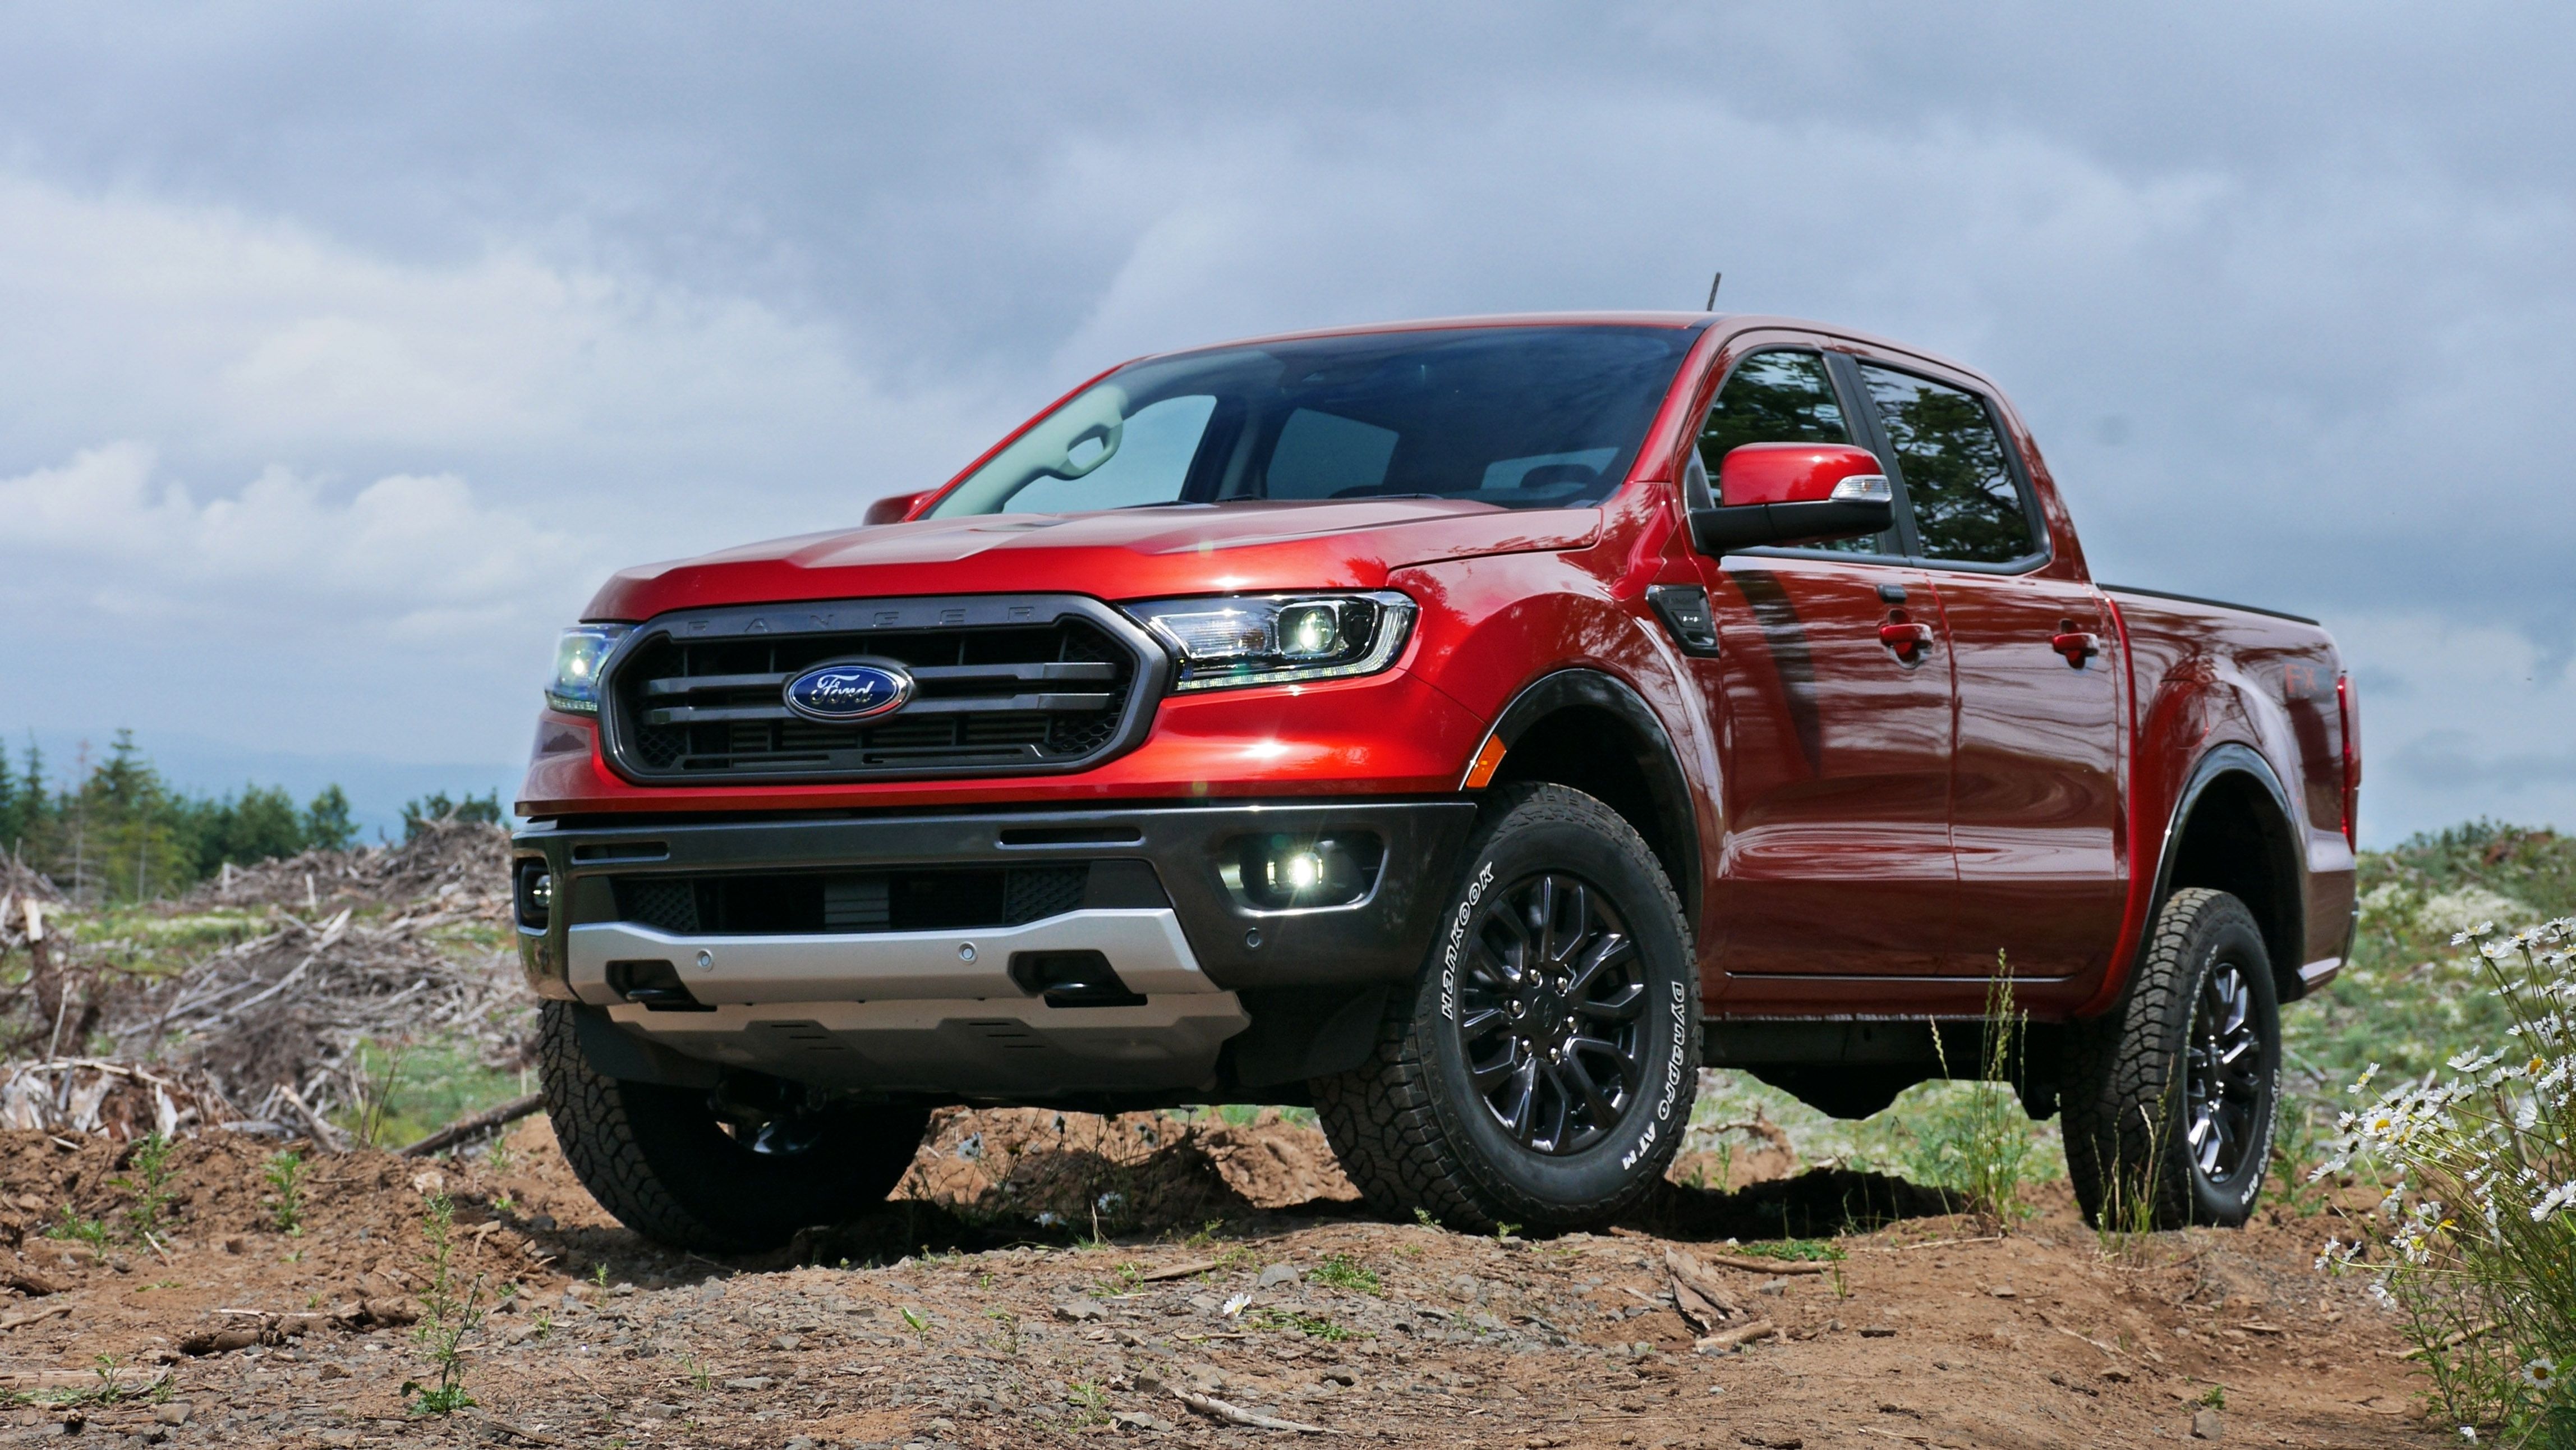 Ford Ranger Lariat SuperCrew Review. Interior space, ride, Sync3 infotainment